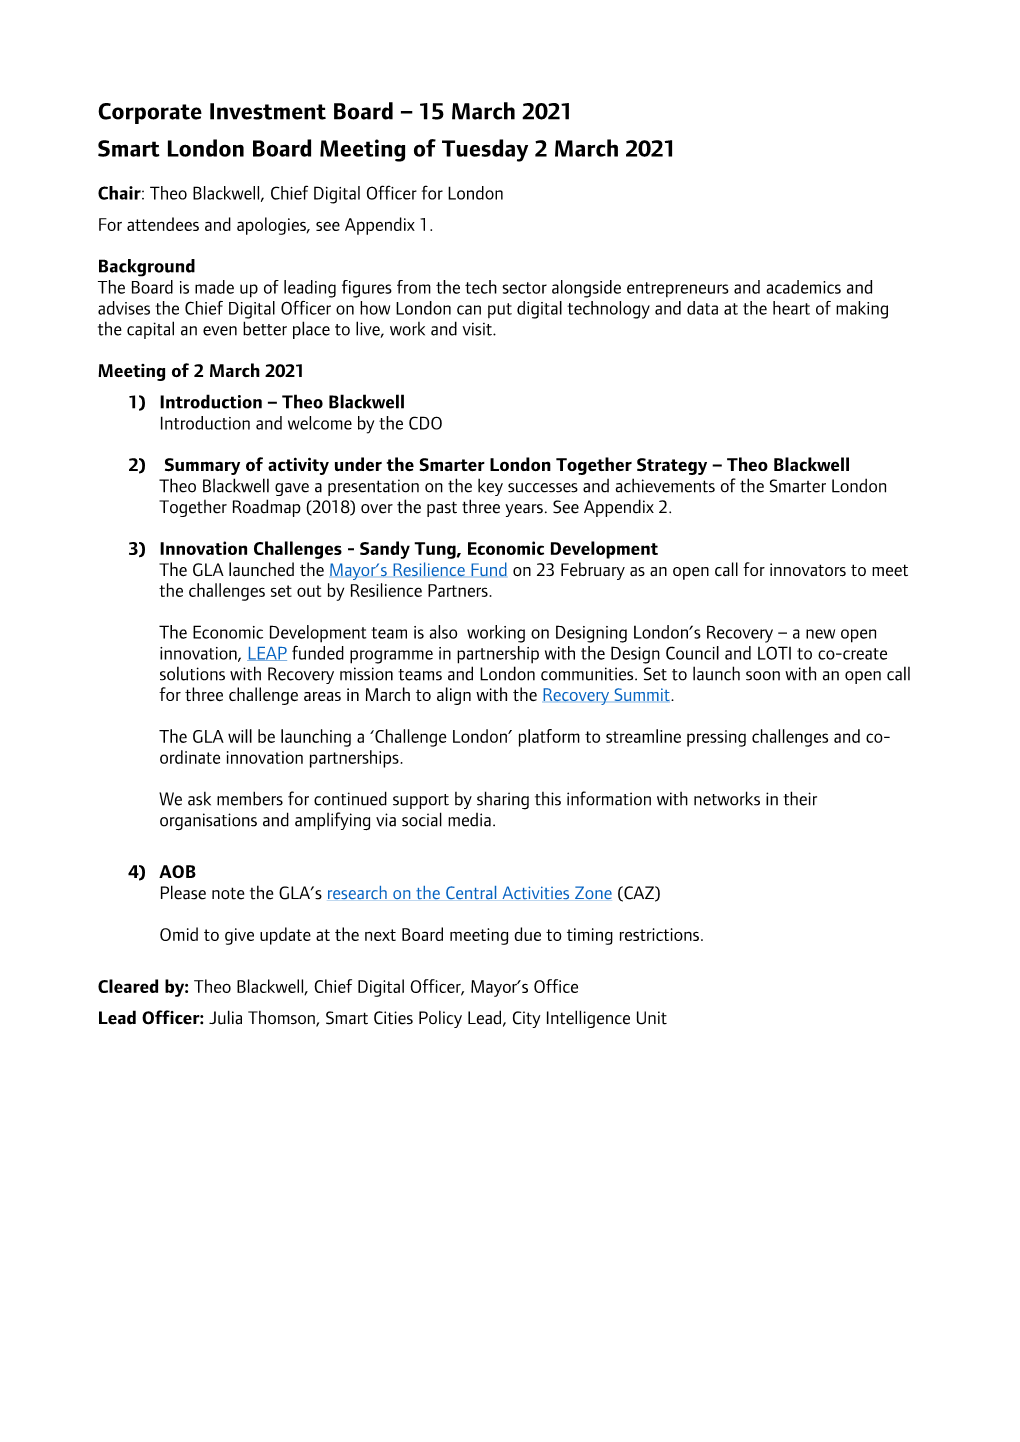 15 March 2021 Smart London Board Meeting of Tuesday 2 March 2021